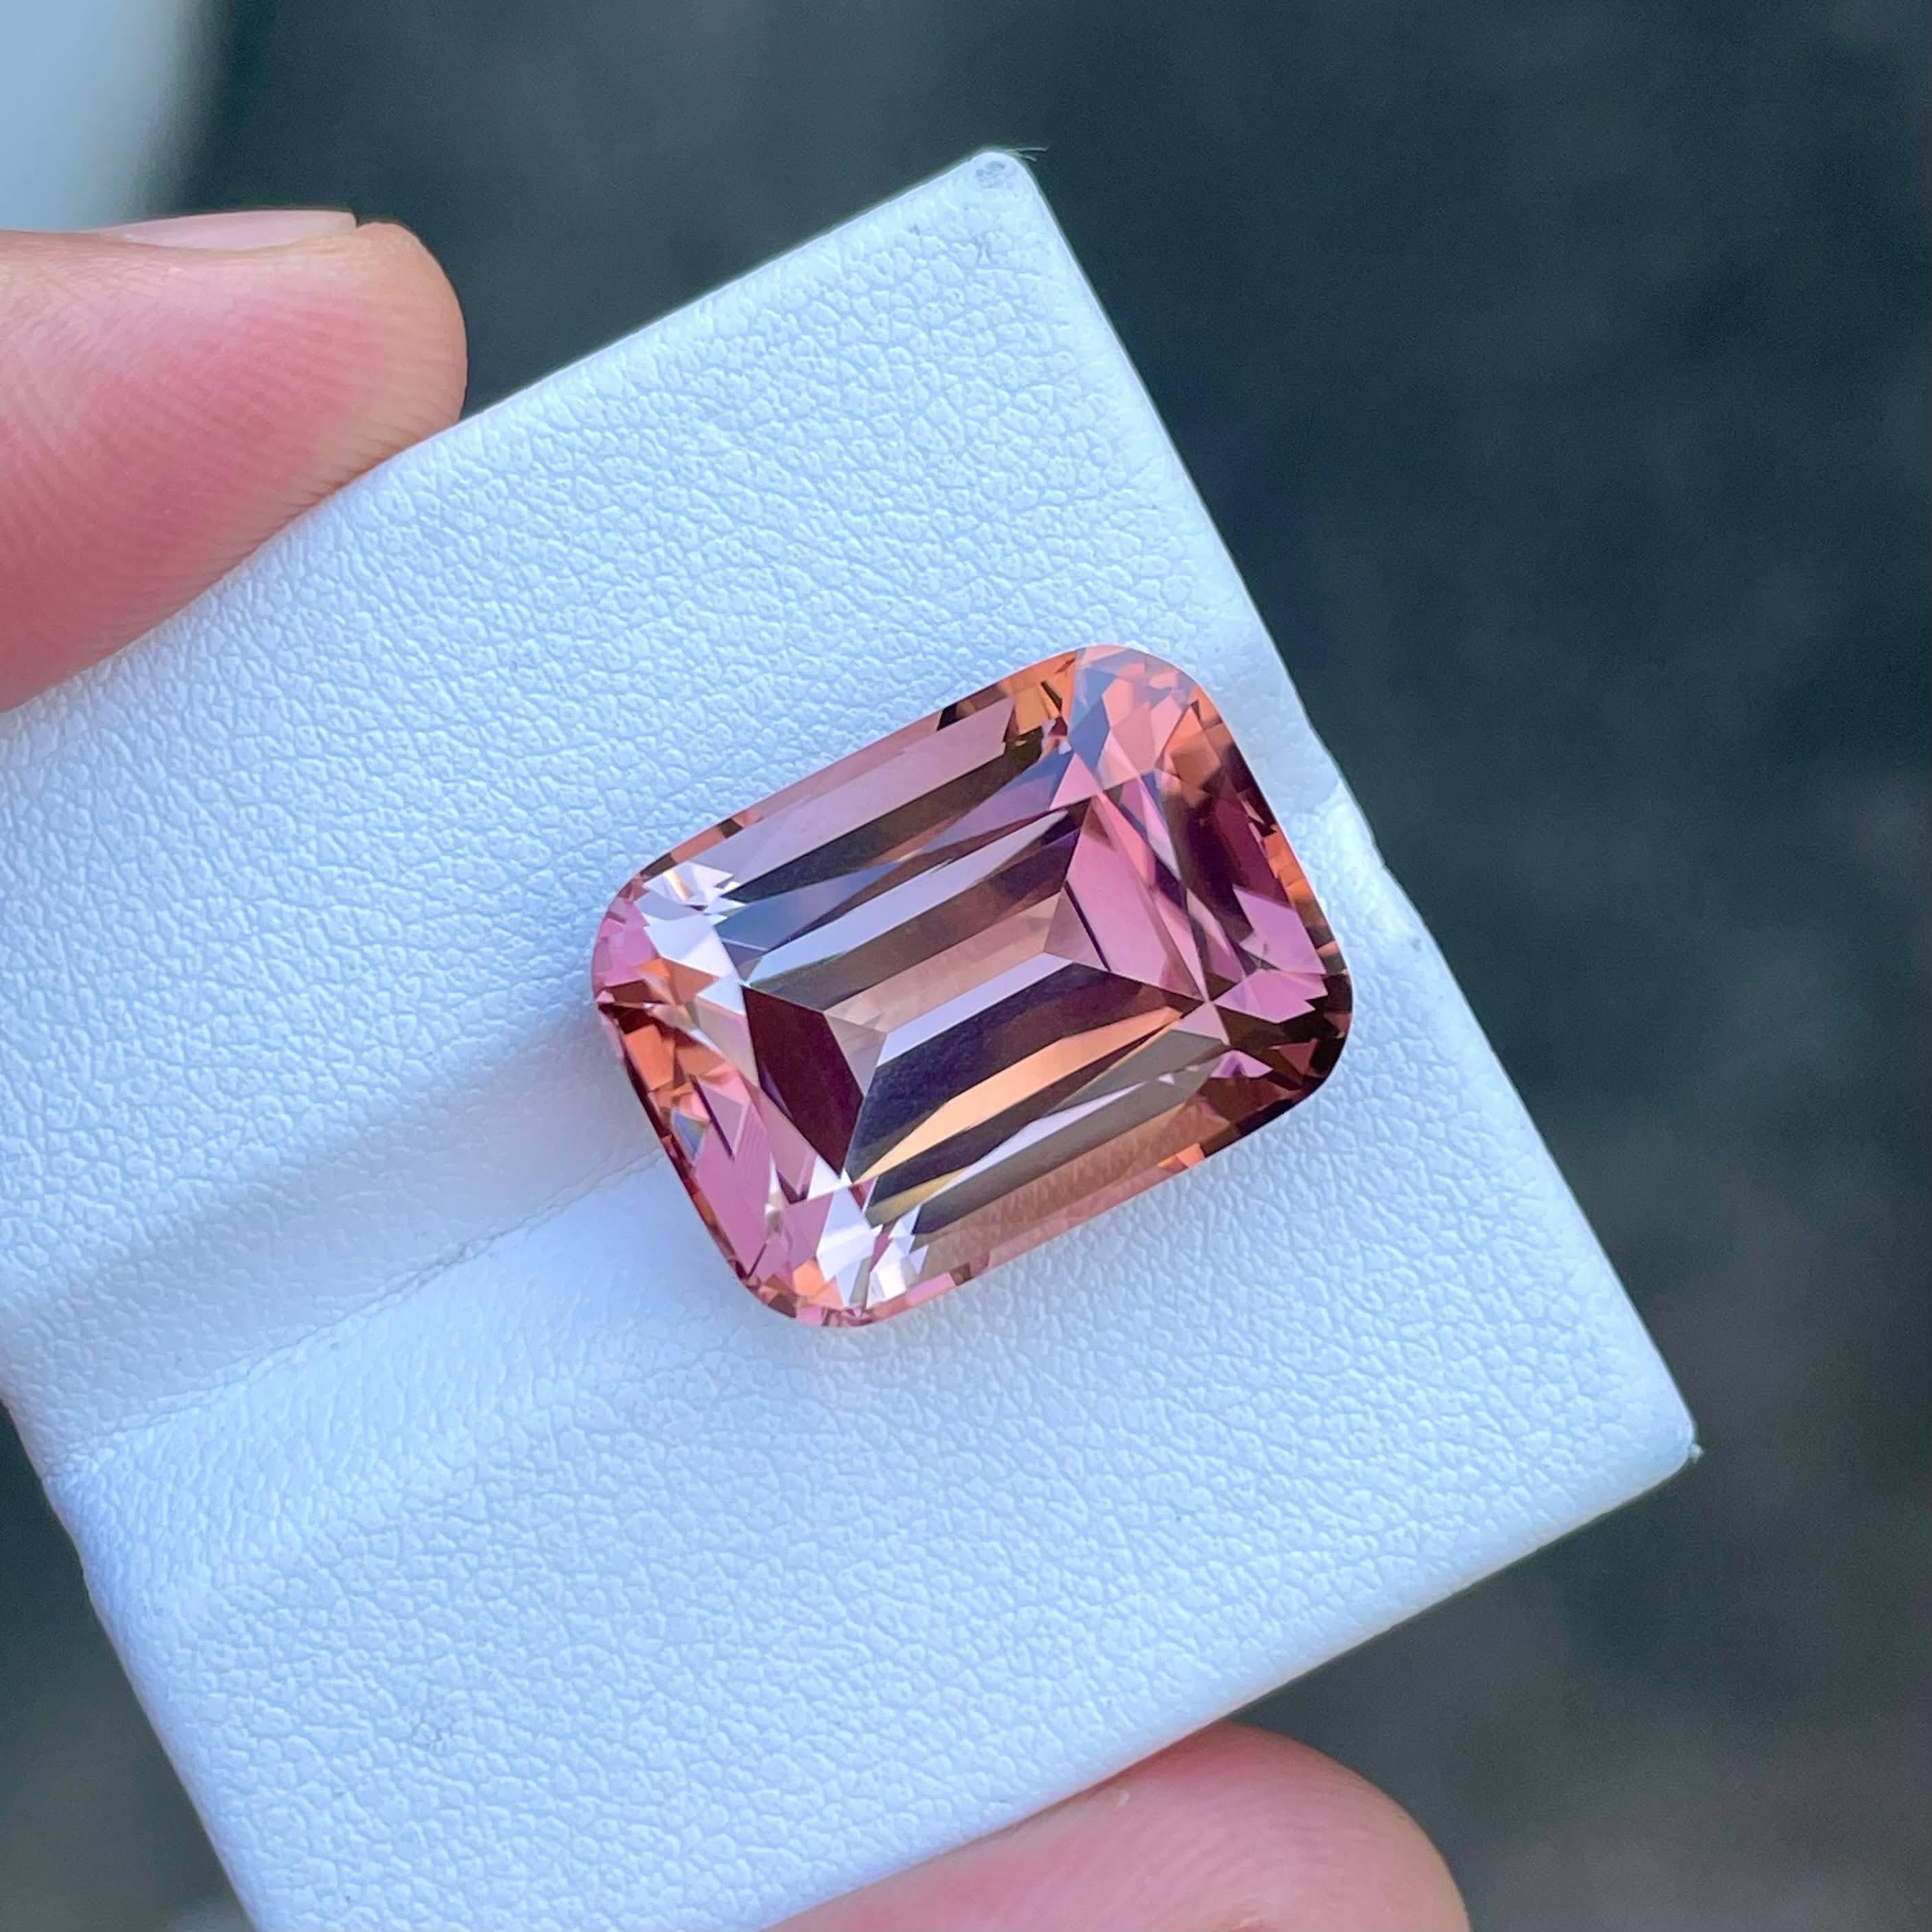 Weight 22.35 carats 
Dimensions 18.5x14.0x11.0 mm
Treatment None
Clarity Loupe Clean
Origin Nigeria
Shape Cushion
Cut Step Cushion



Soft Pink Tourmaline Stone, a captivating gem originating from Nigeria, boasts a remarkable 22.35 carats of natural